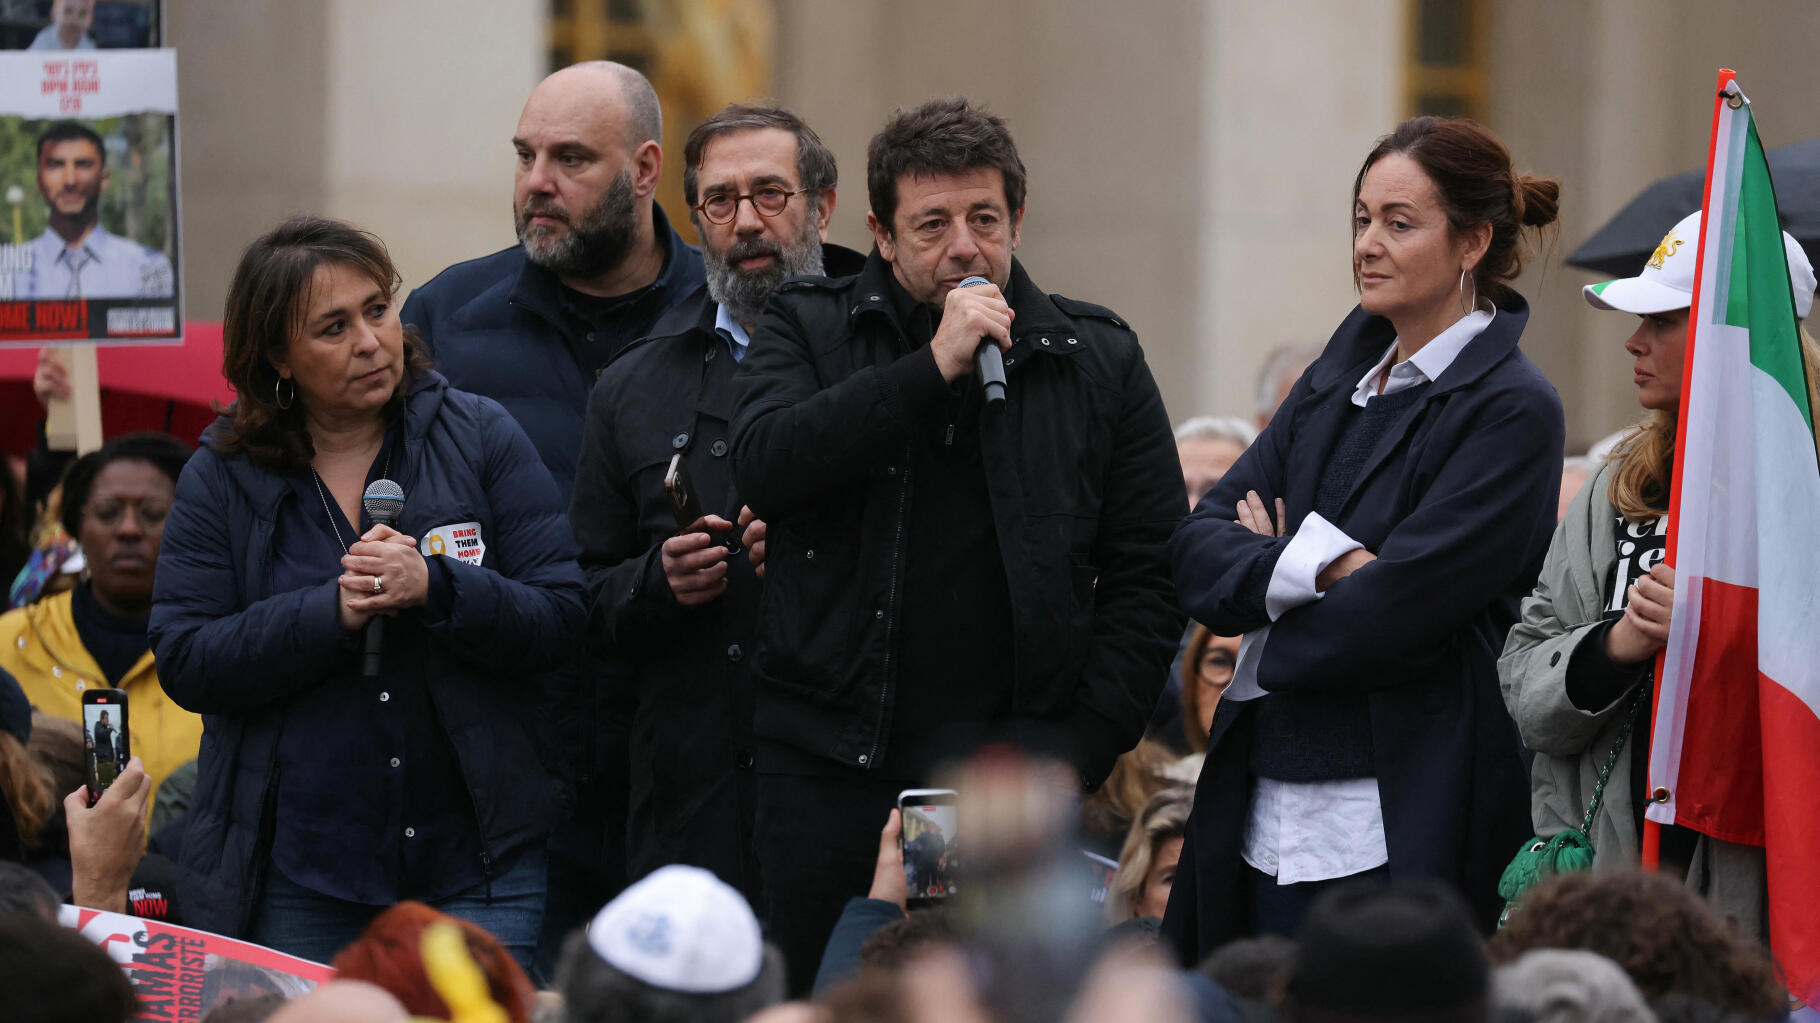 Patrick Bruel and Enrico Macias at a Parisian demonstration for the release of hostages